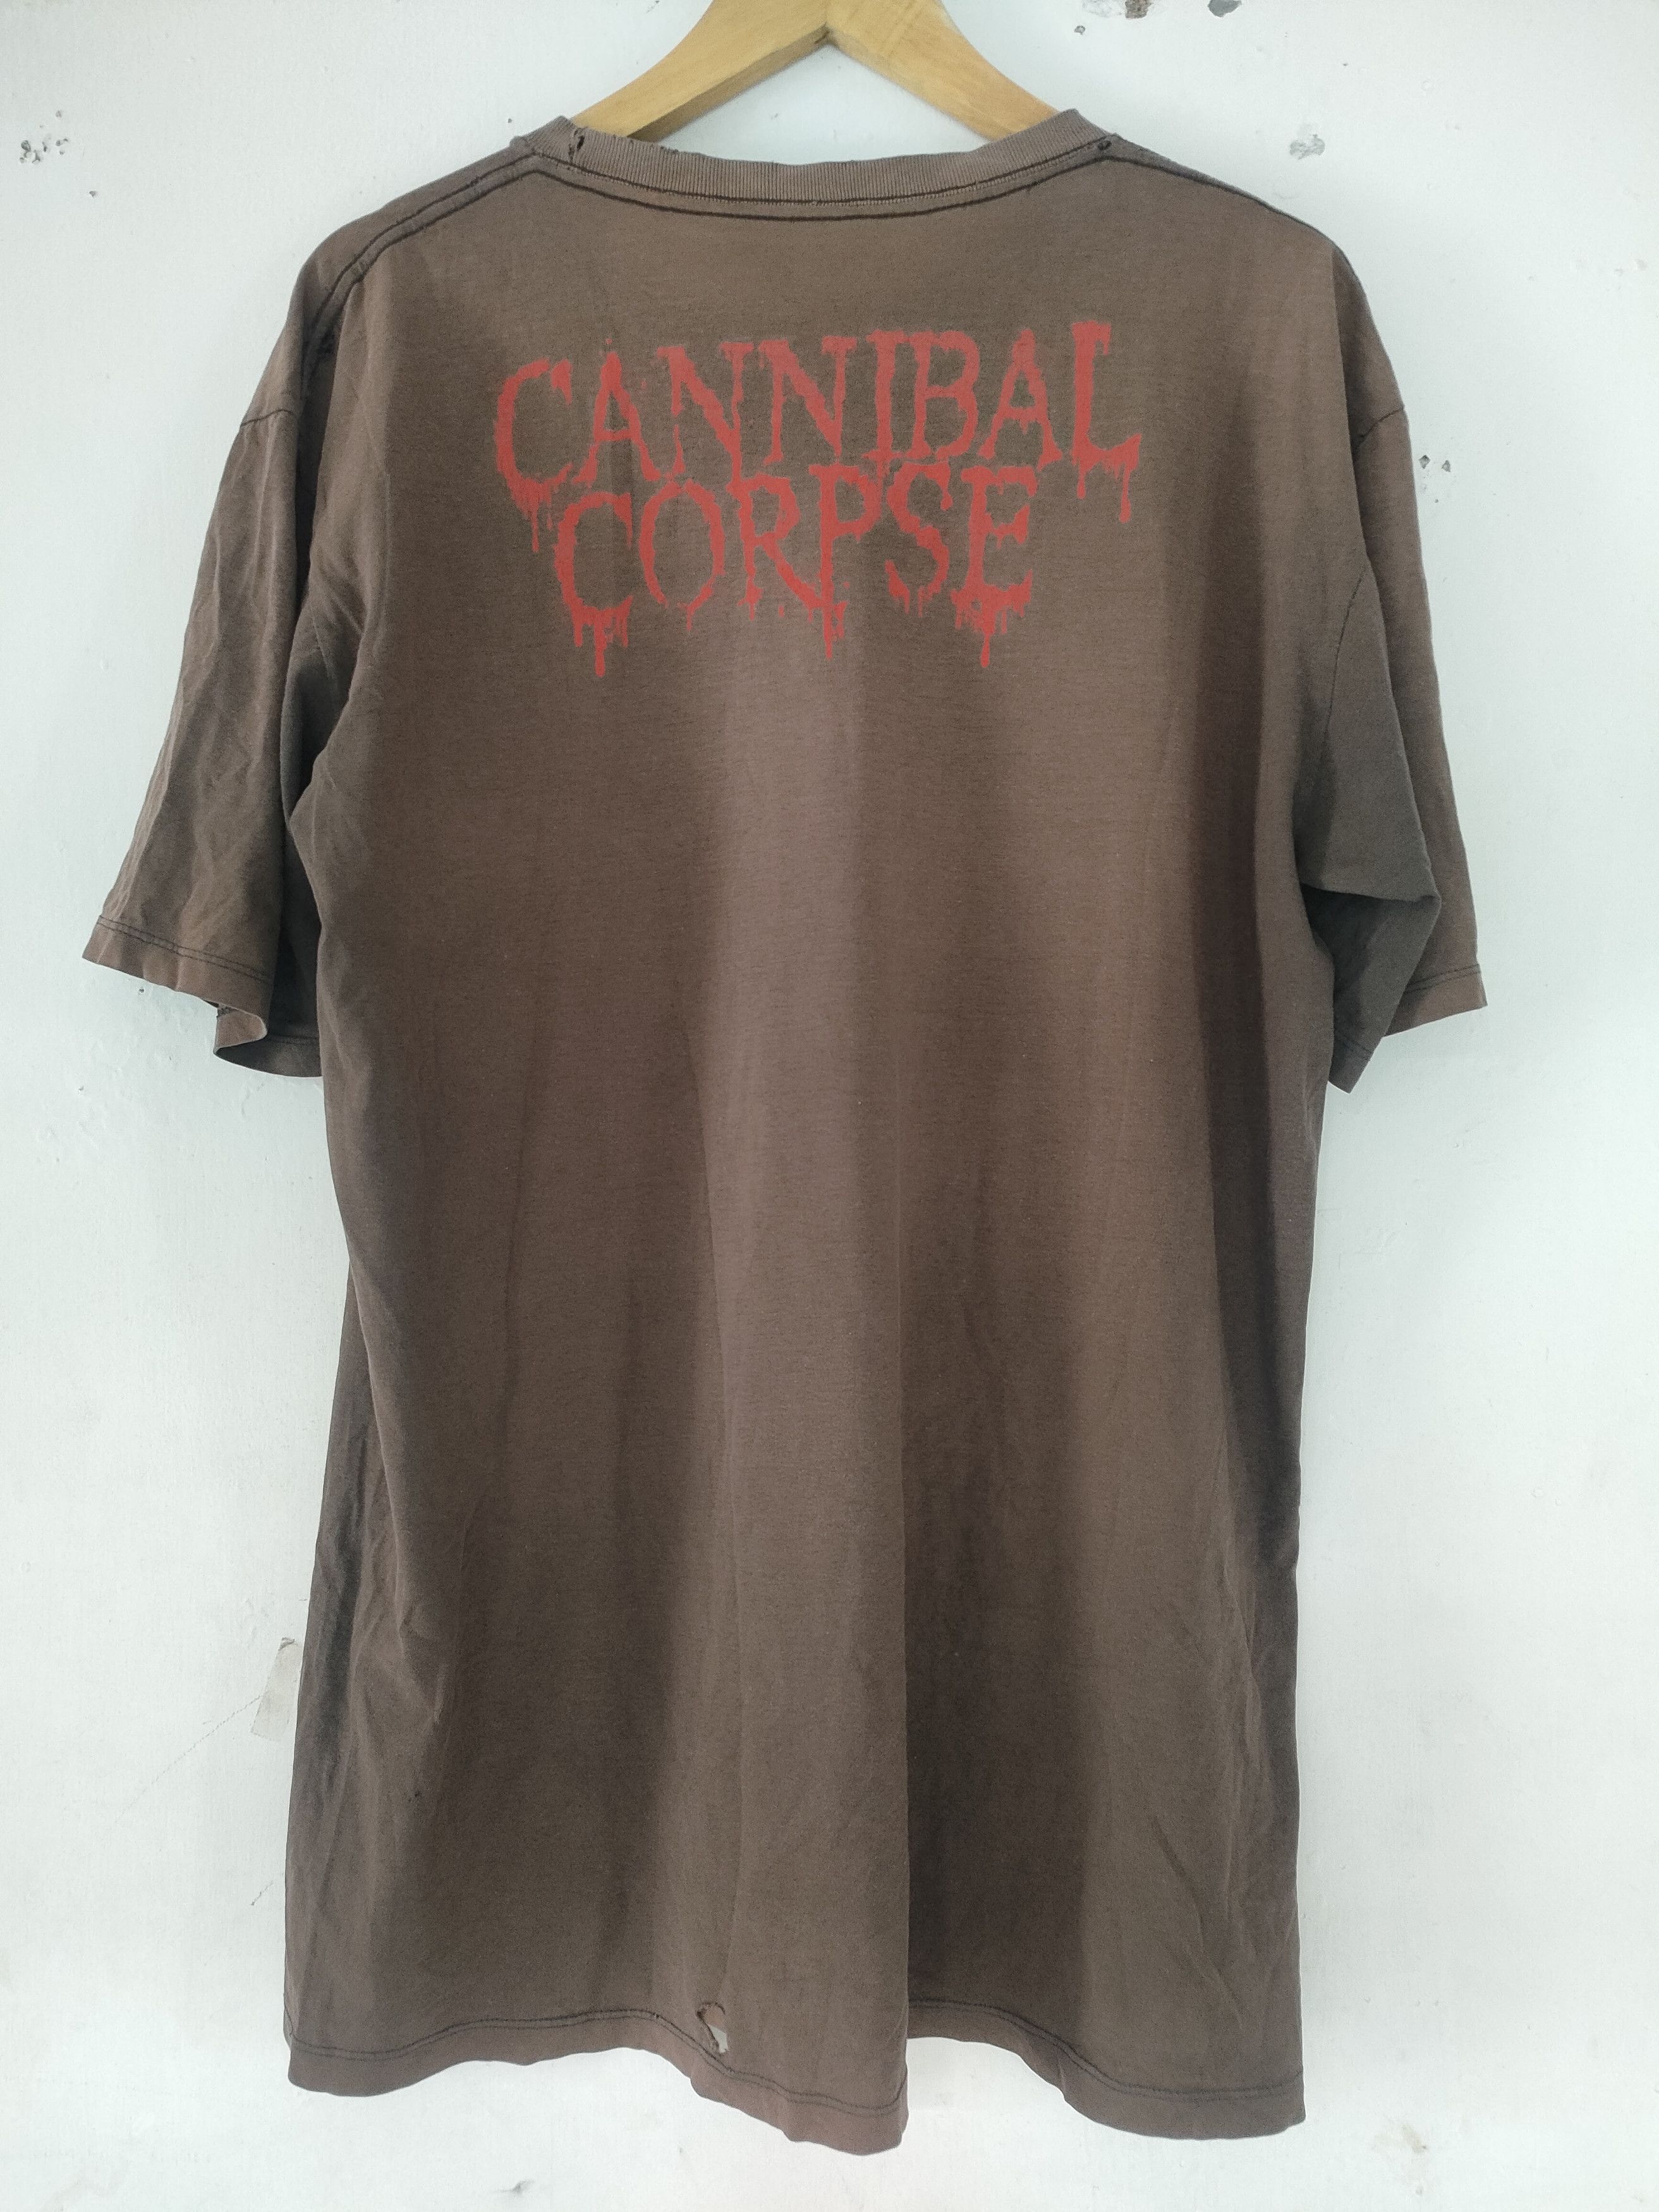 CANNIBAL CORPSE VINTAGE SHIRT THE WRETCHED SPAWN - 2